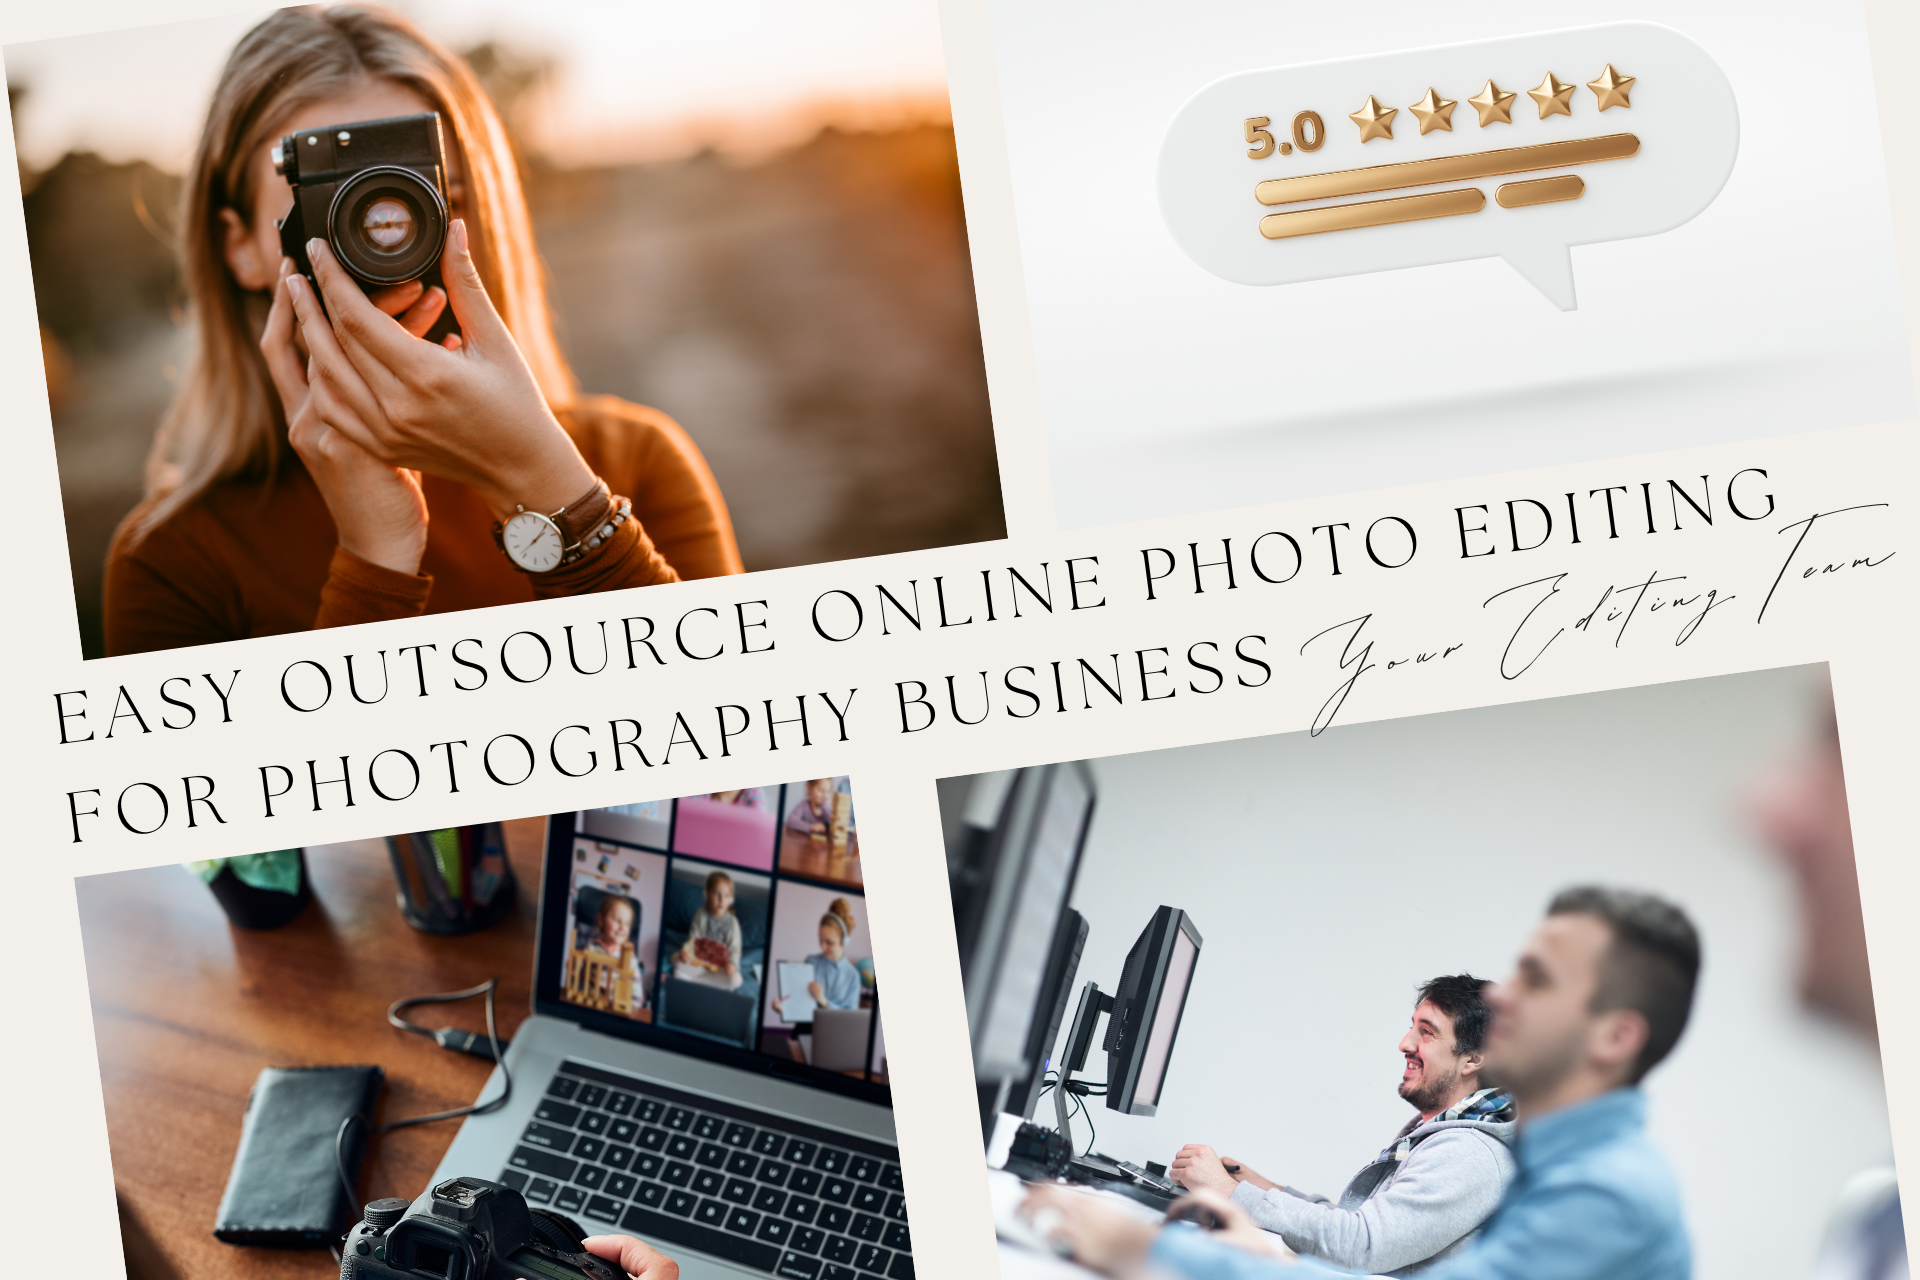 Finding the Best Photo Editor program for Your Photography Business